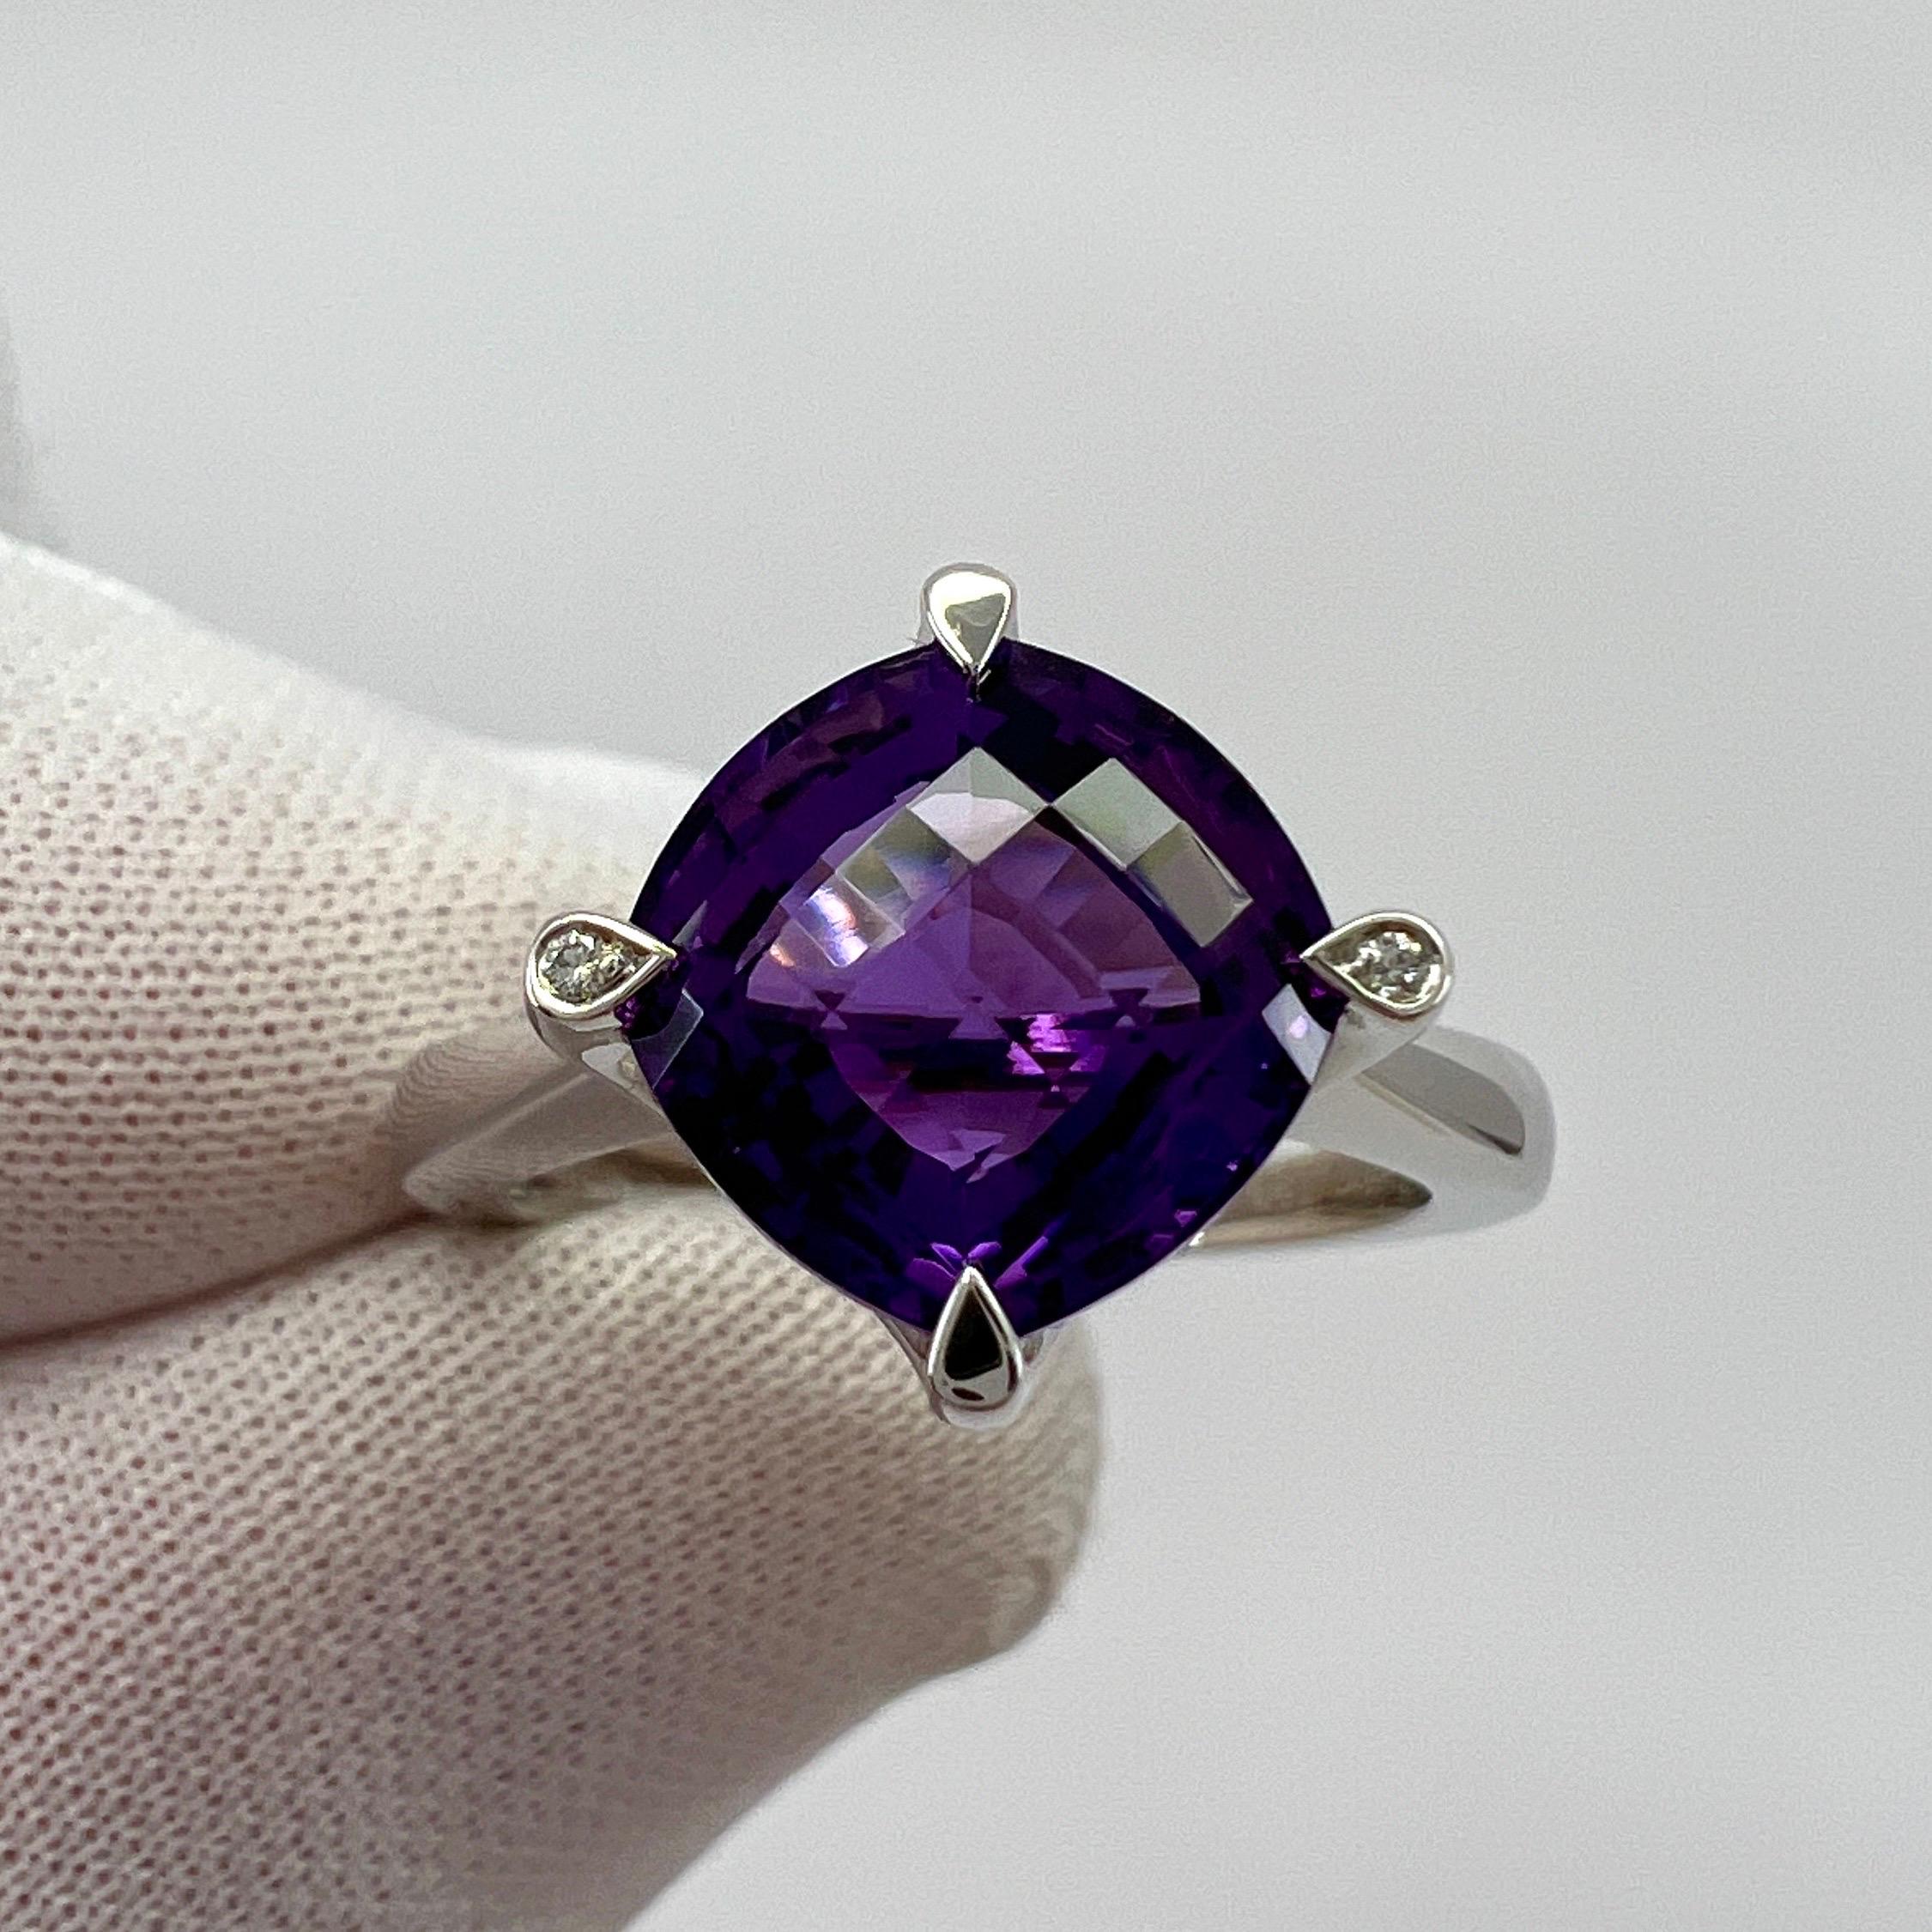 Very Rare Cartier Inde Mysterieuse Fancy Cut Purple Amethyst And Diamond 18k White Gold Ring.

Stunning white gold ring with a fine 9mm claw set purple amethyst. 
Fine jewellery houses like Cartier only use the finest of gemstones and this amethyst